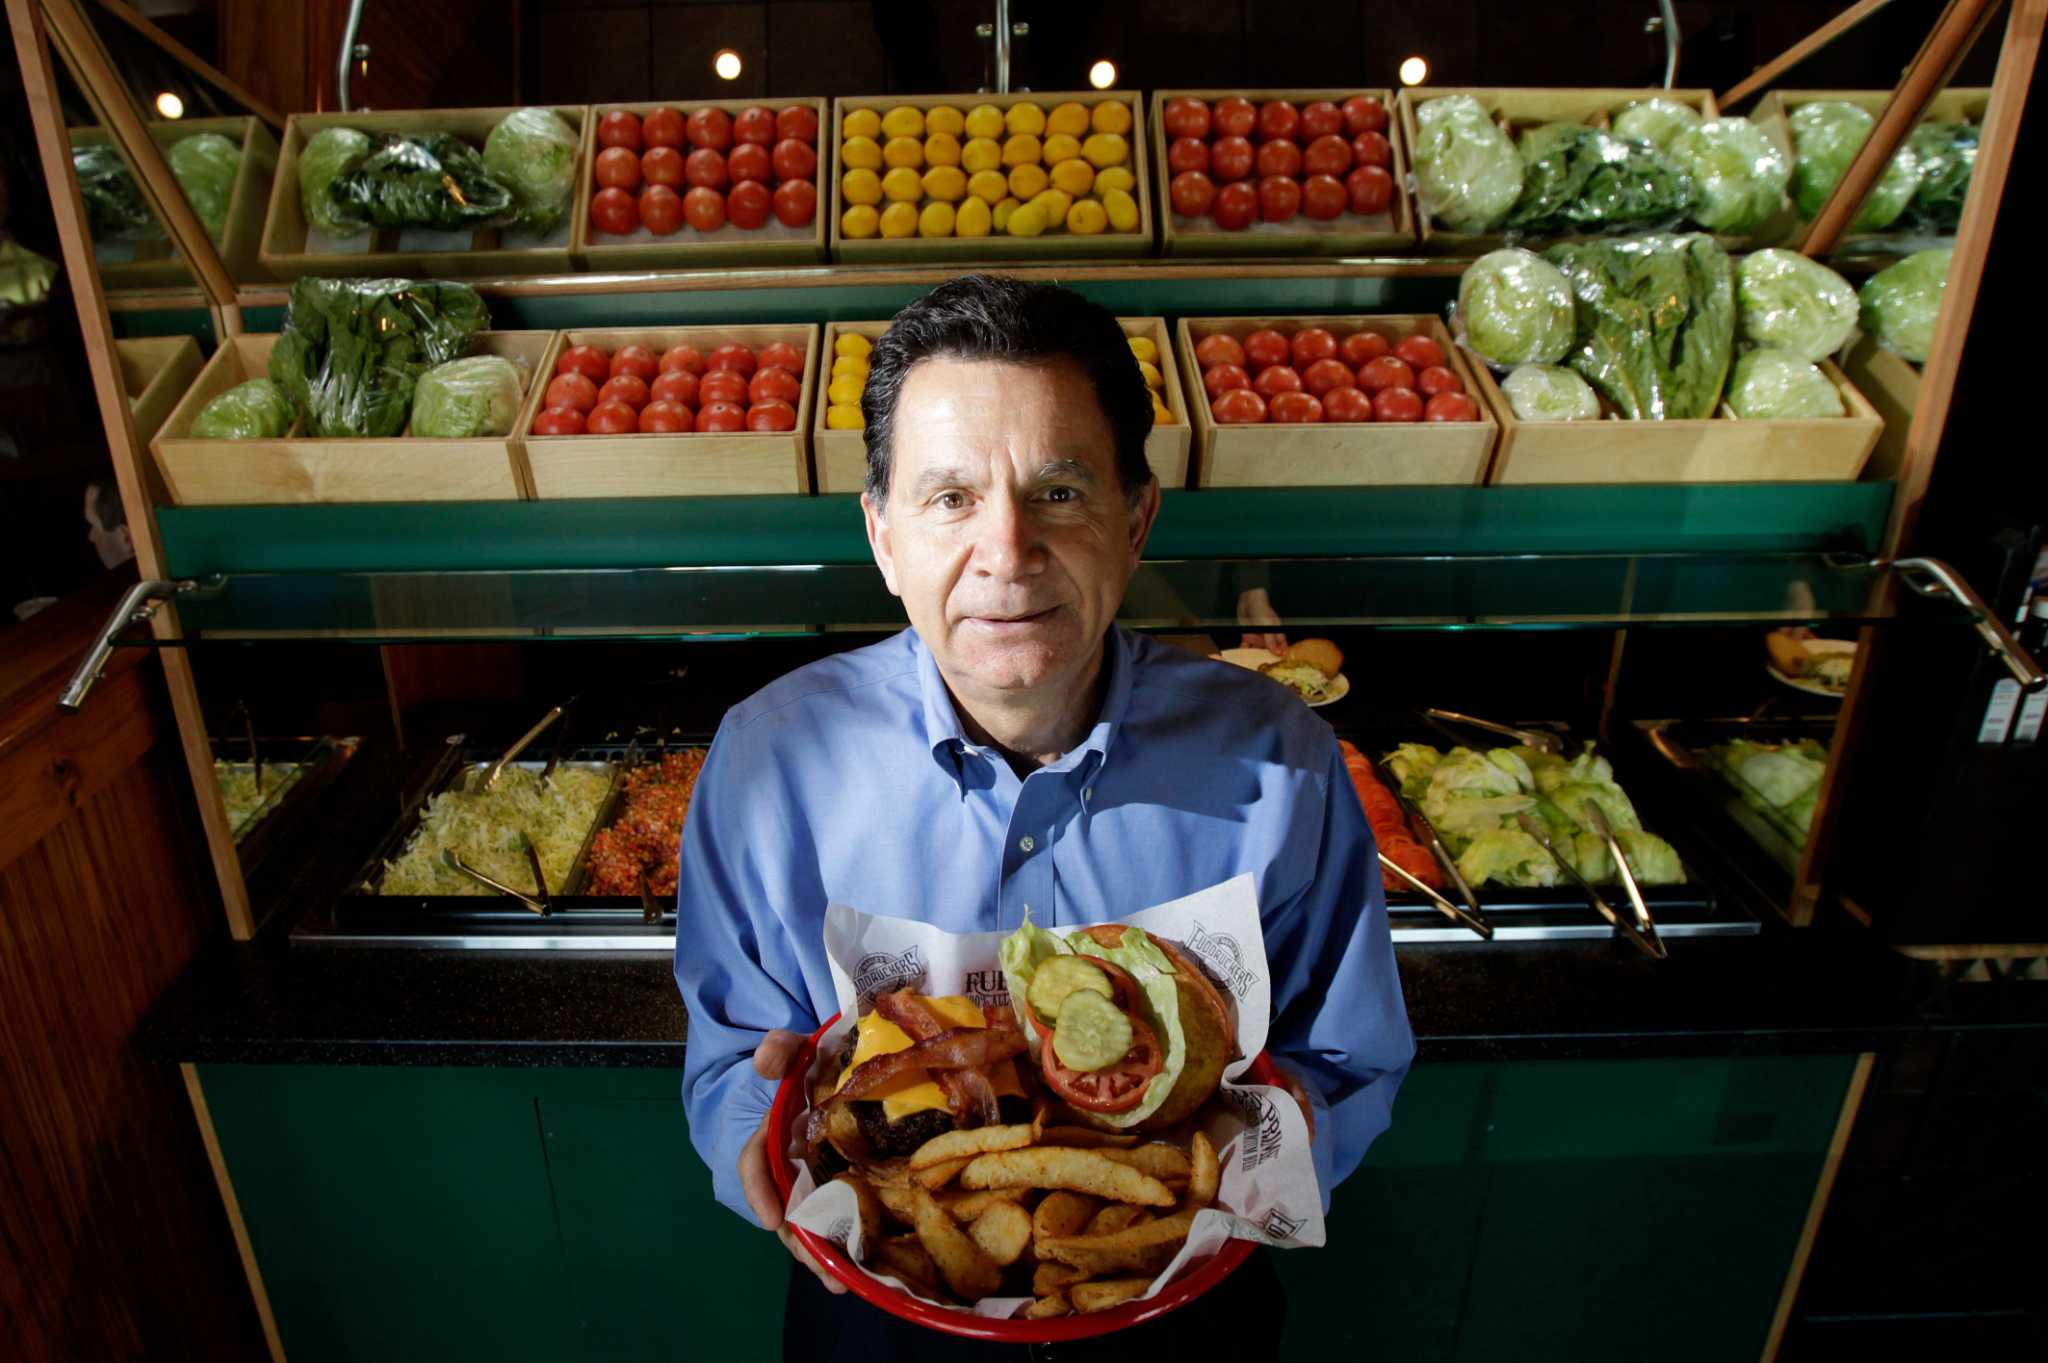 San Antonio's Papa's Burgers shares new name after legal scuffle with  Houston's Pappas family, San Antonio